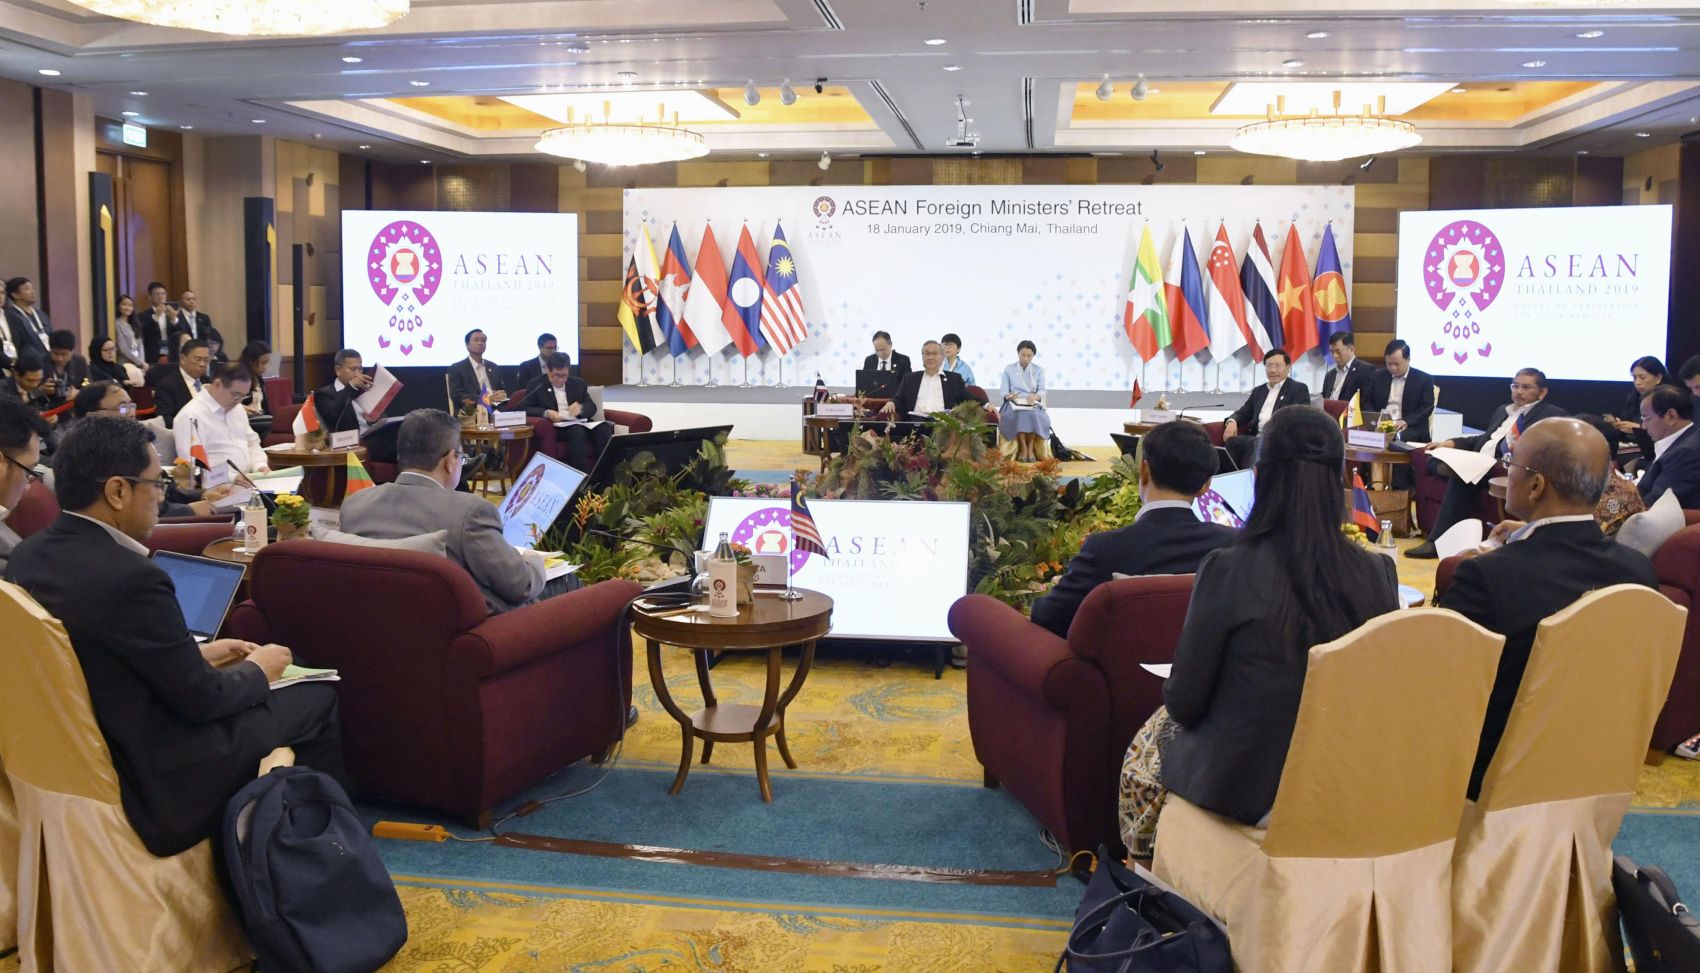 ASEAN Centrality: Caught in the Trap of China’s Regionalism